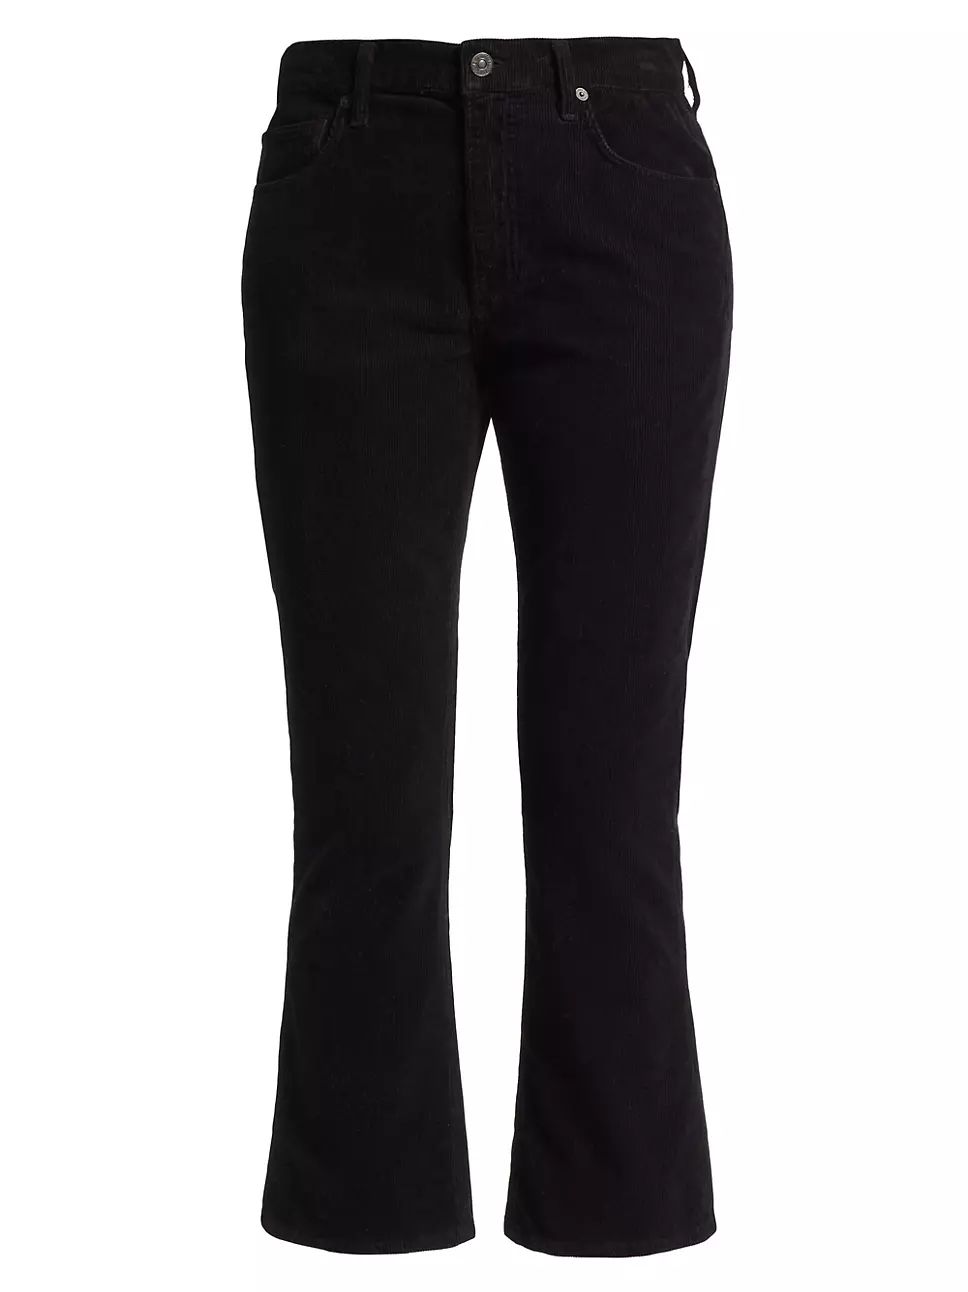 Isola Corduroy Cropped Jeans | Saks Fifth Avenue